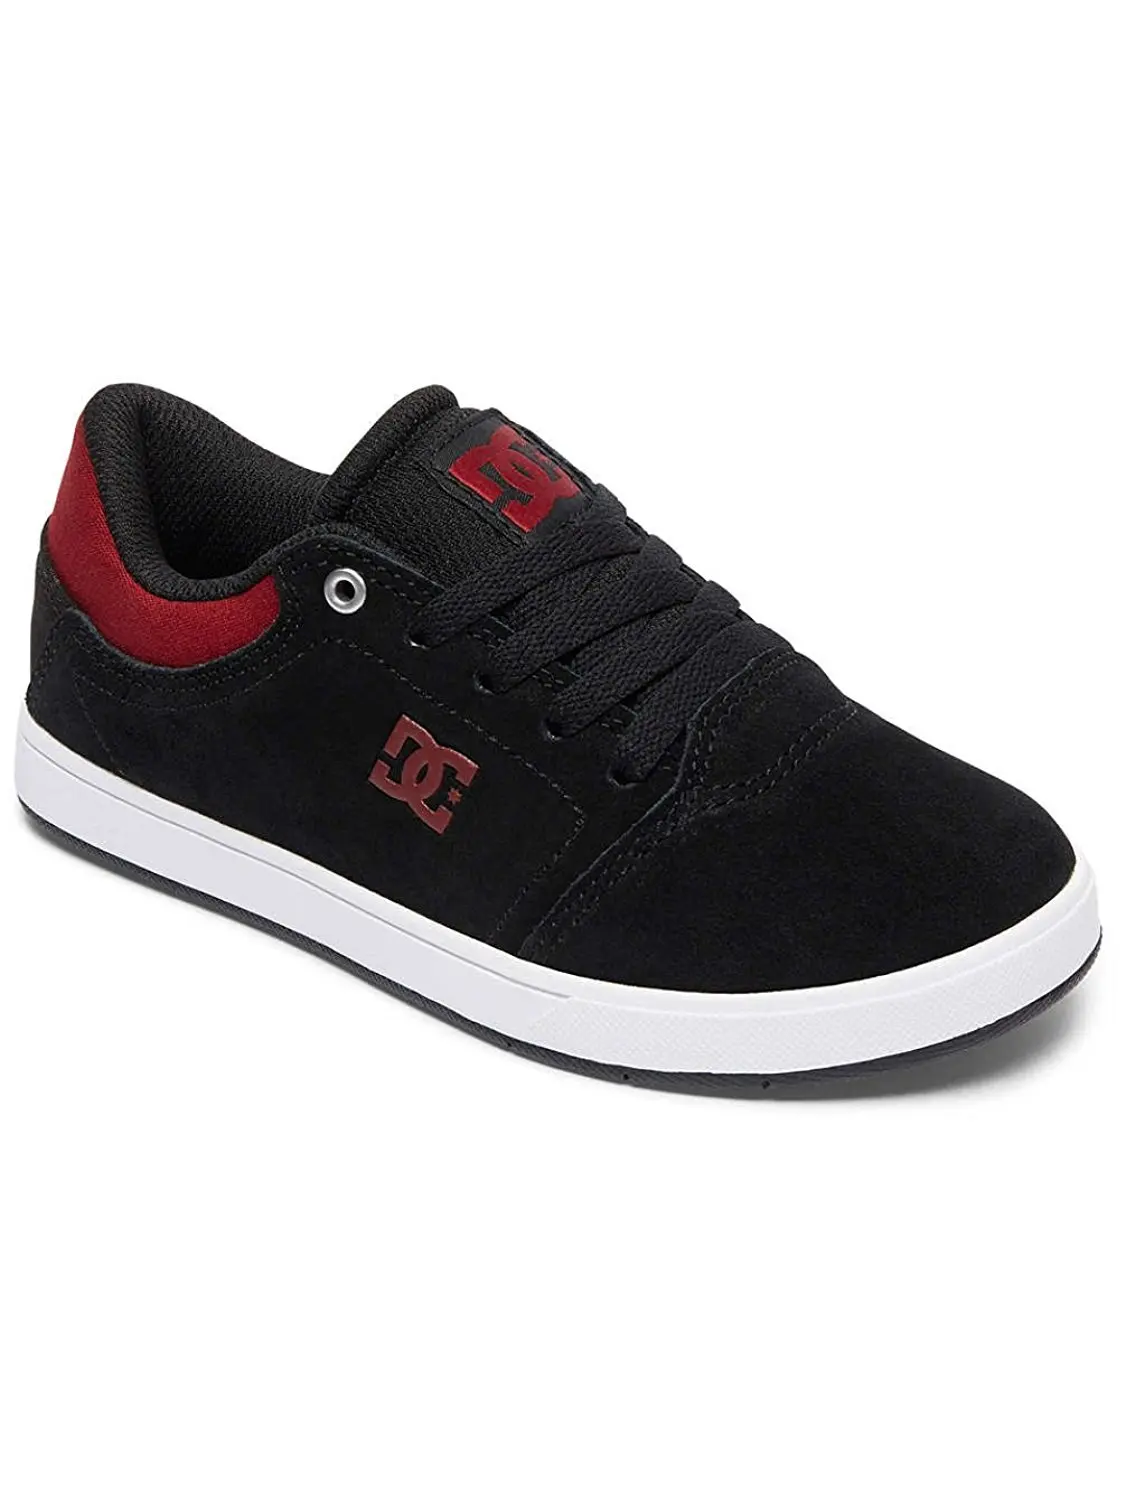 red and black dc shoes